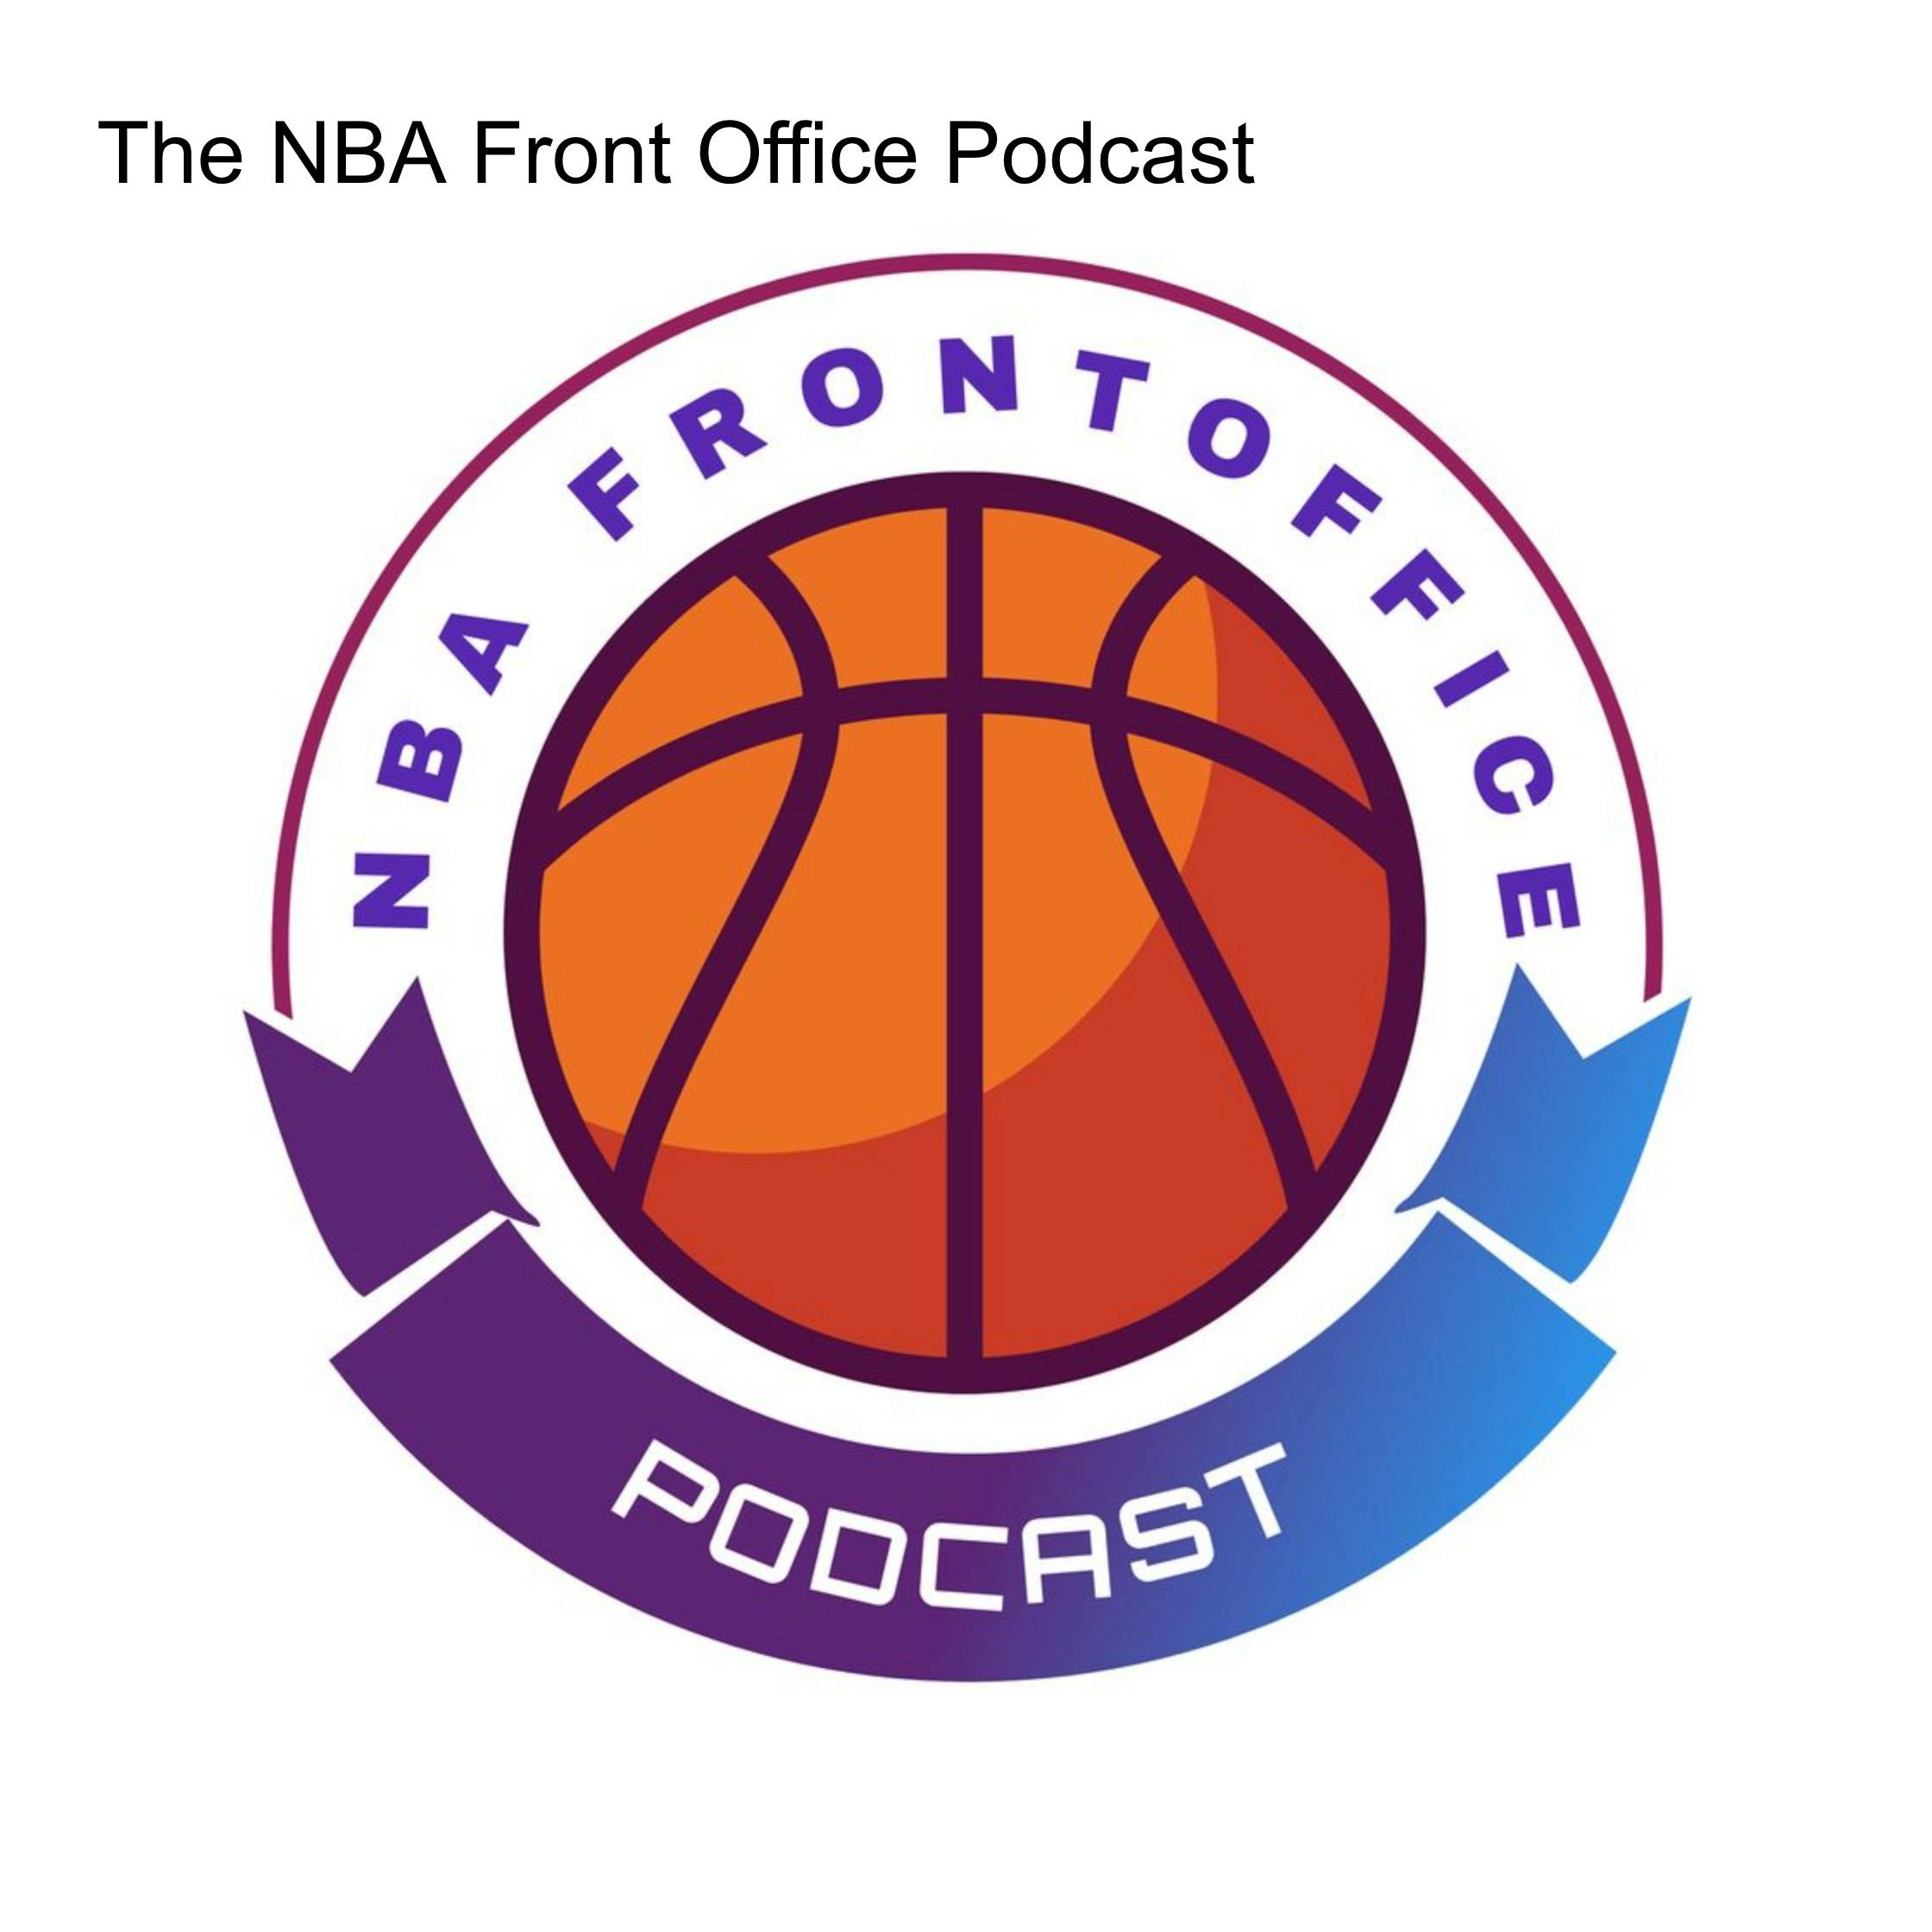 The NBA Front Office Podcast podcast